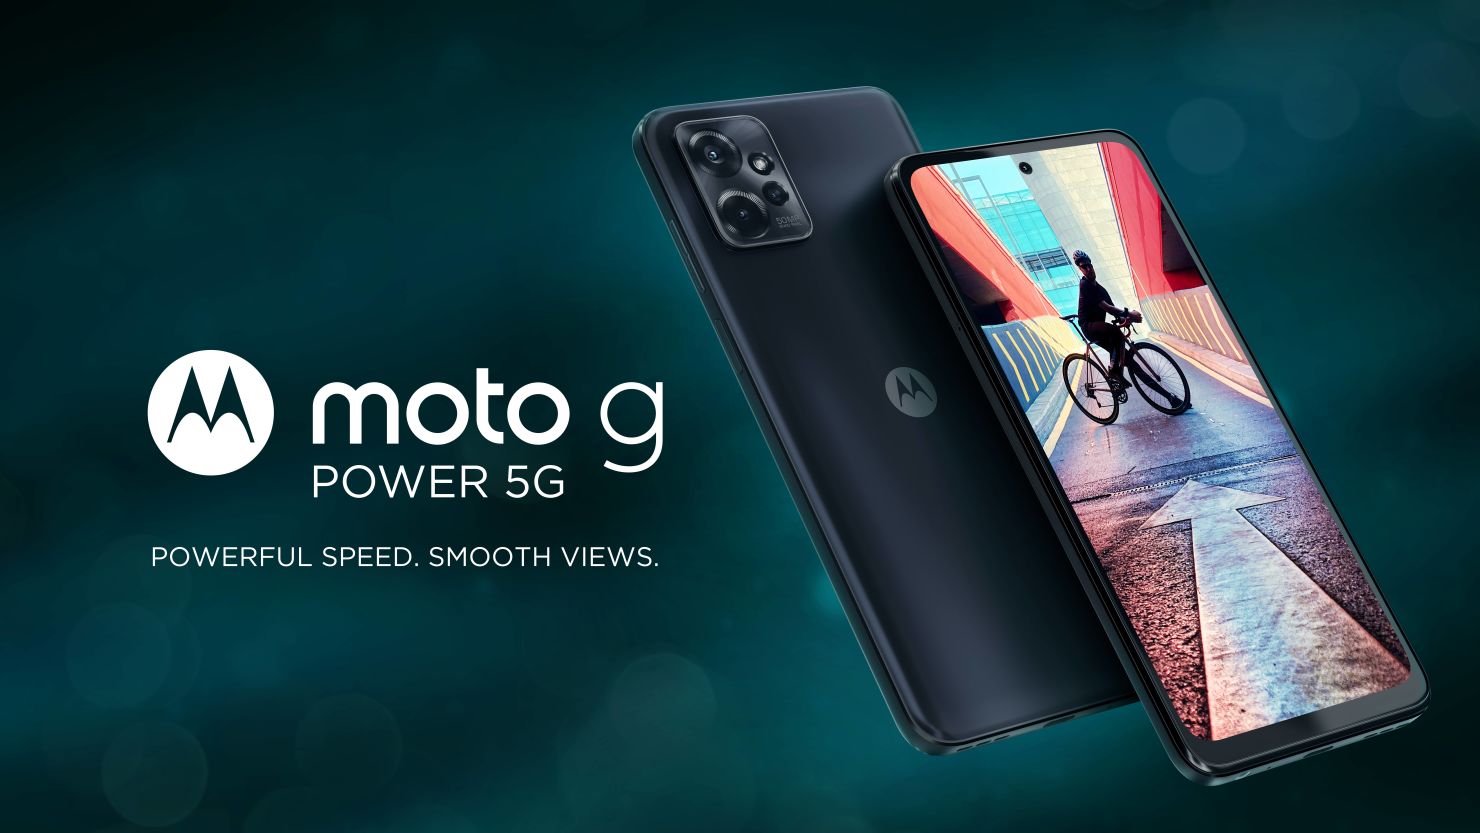 Motorola Moto G4 Play now available for purchase in Canada